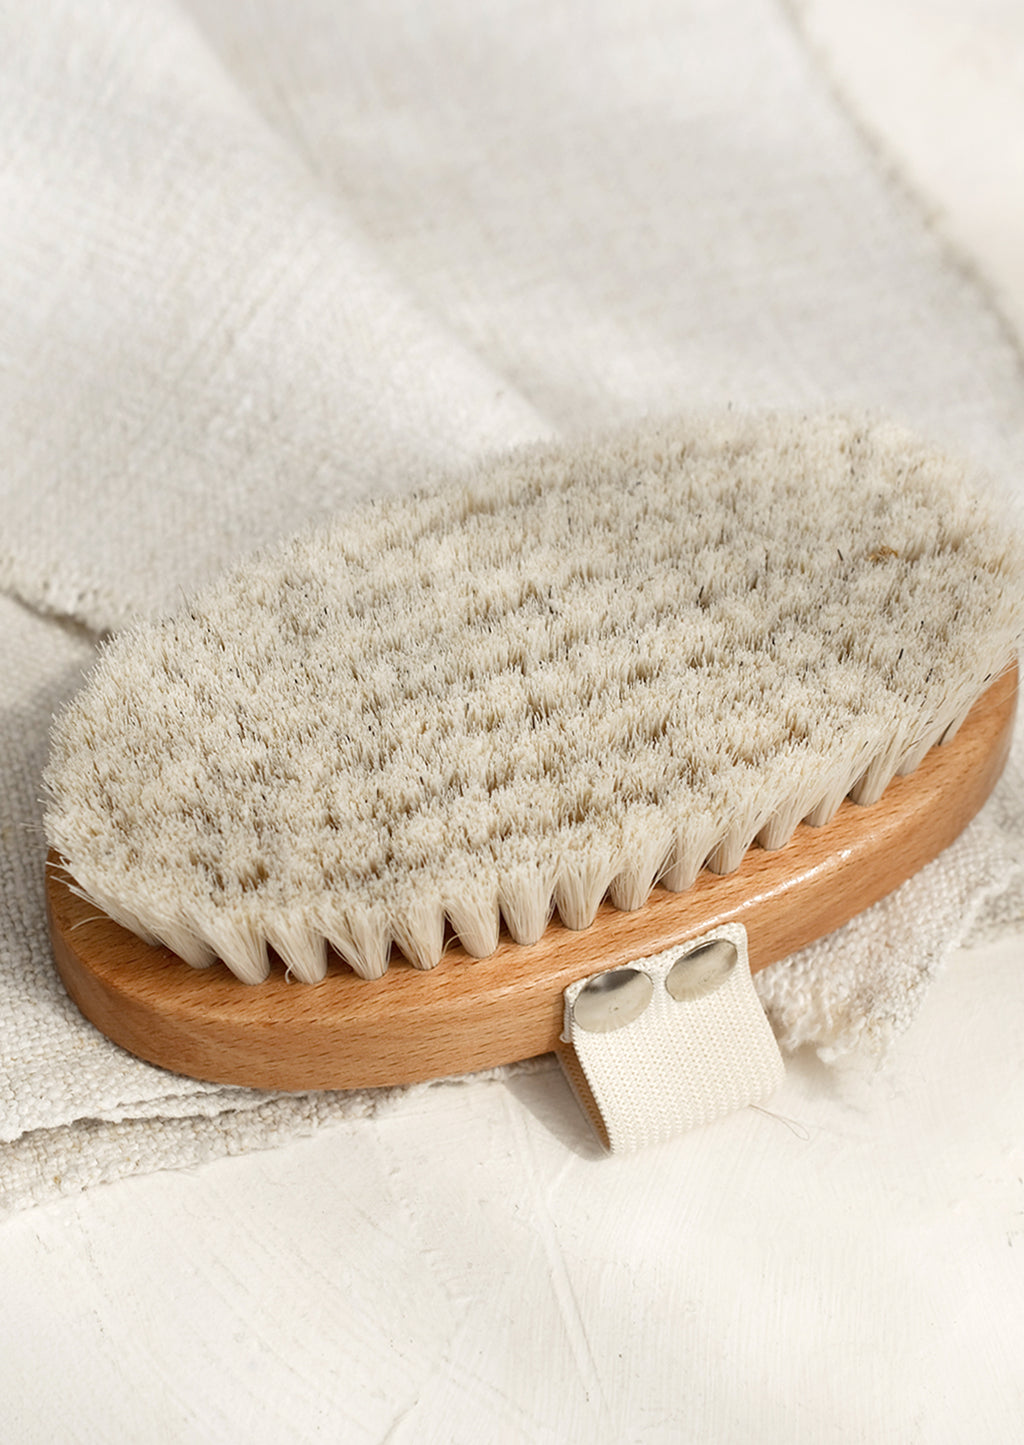 1: An oval shaped wood and bristle bath brush with elastic hand strap.